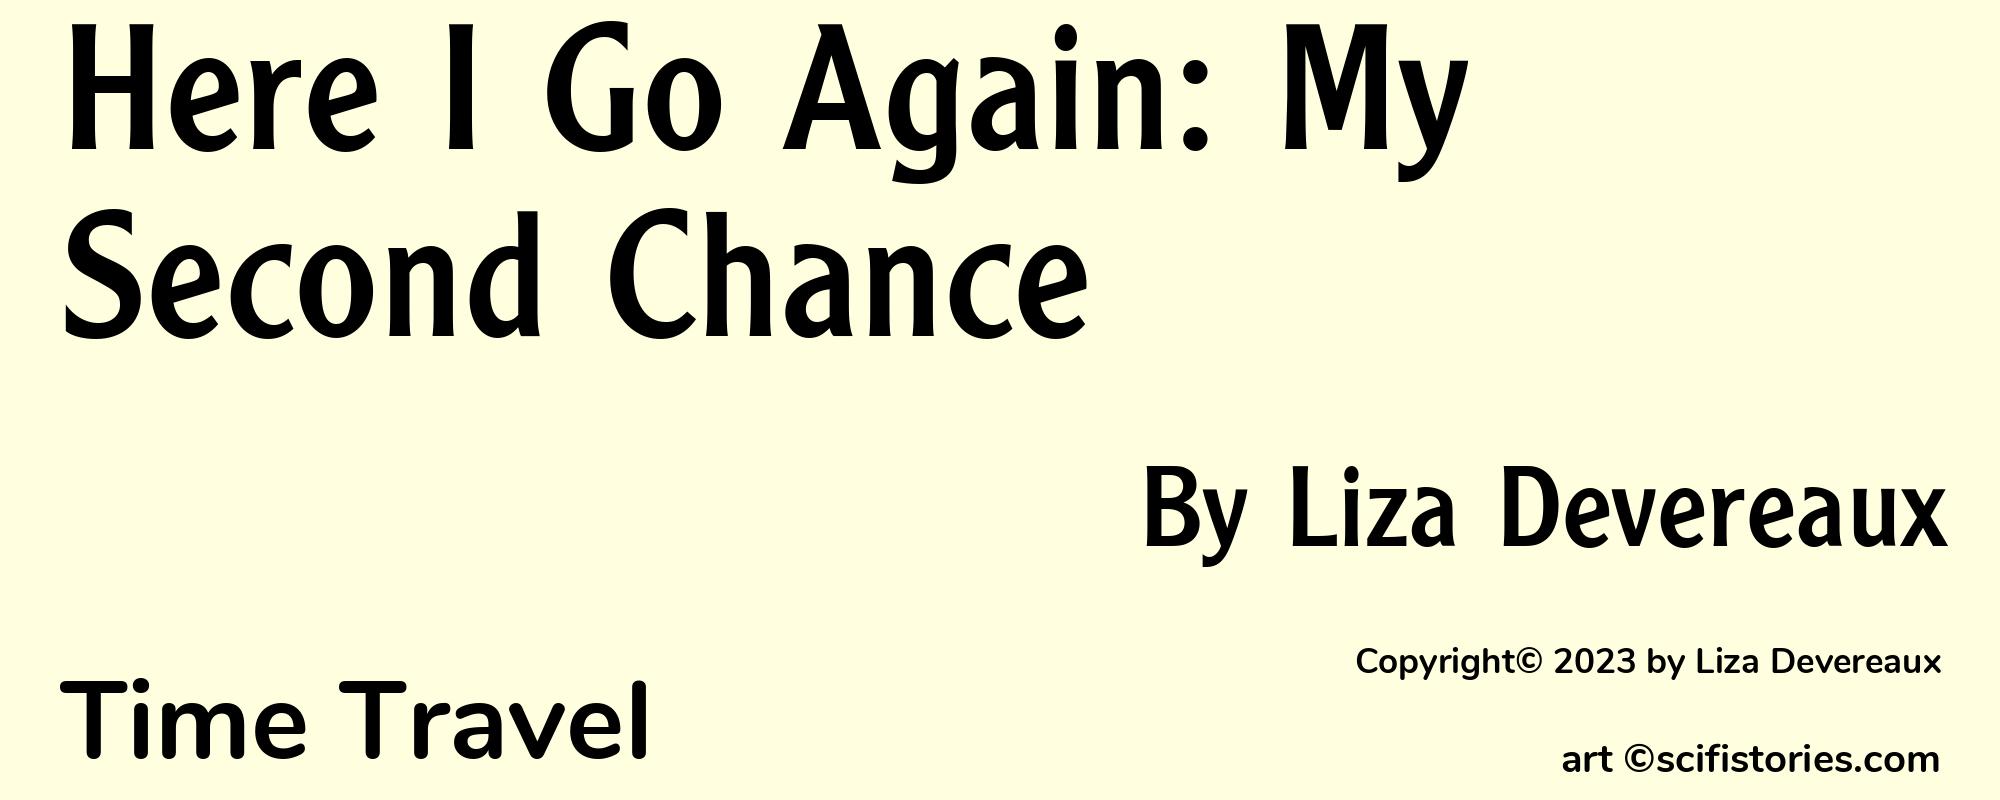 Here I Go Again: My Second Chance - Cover